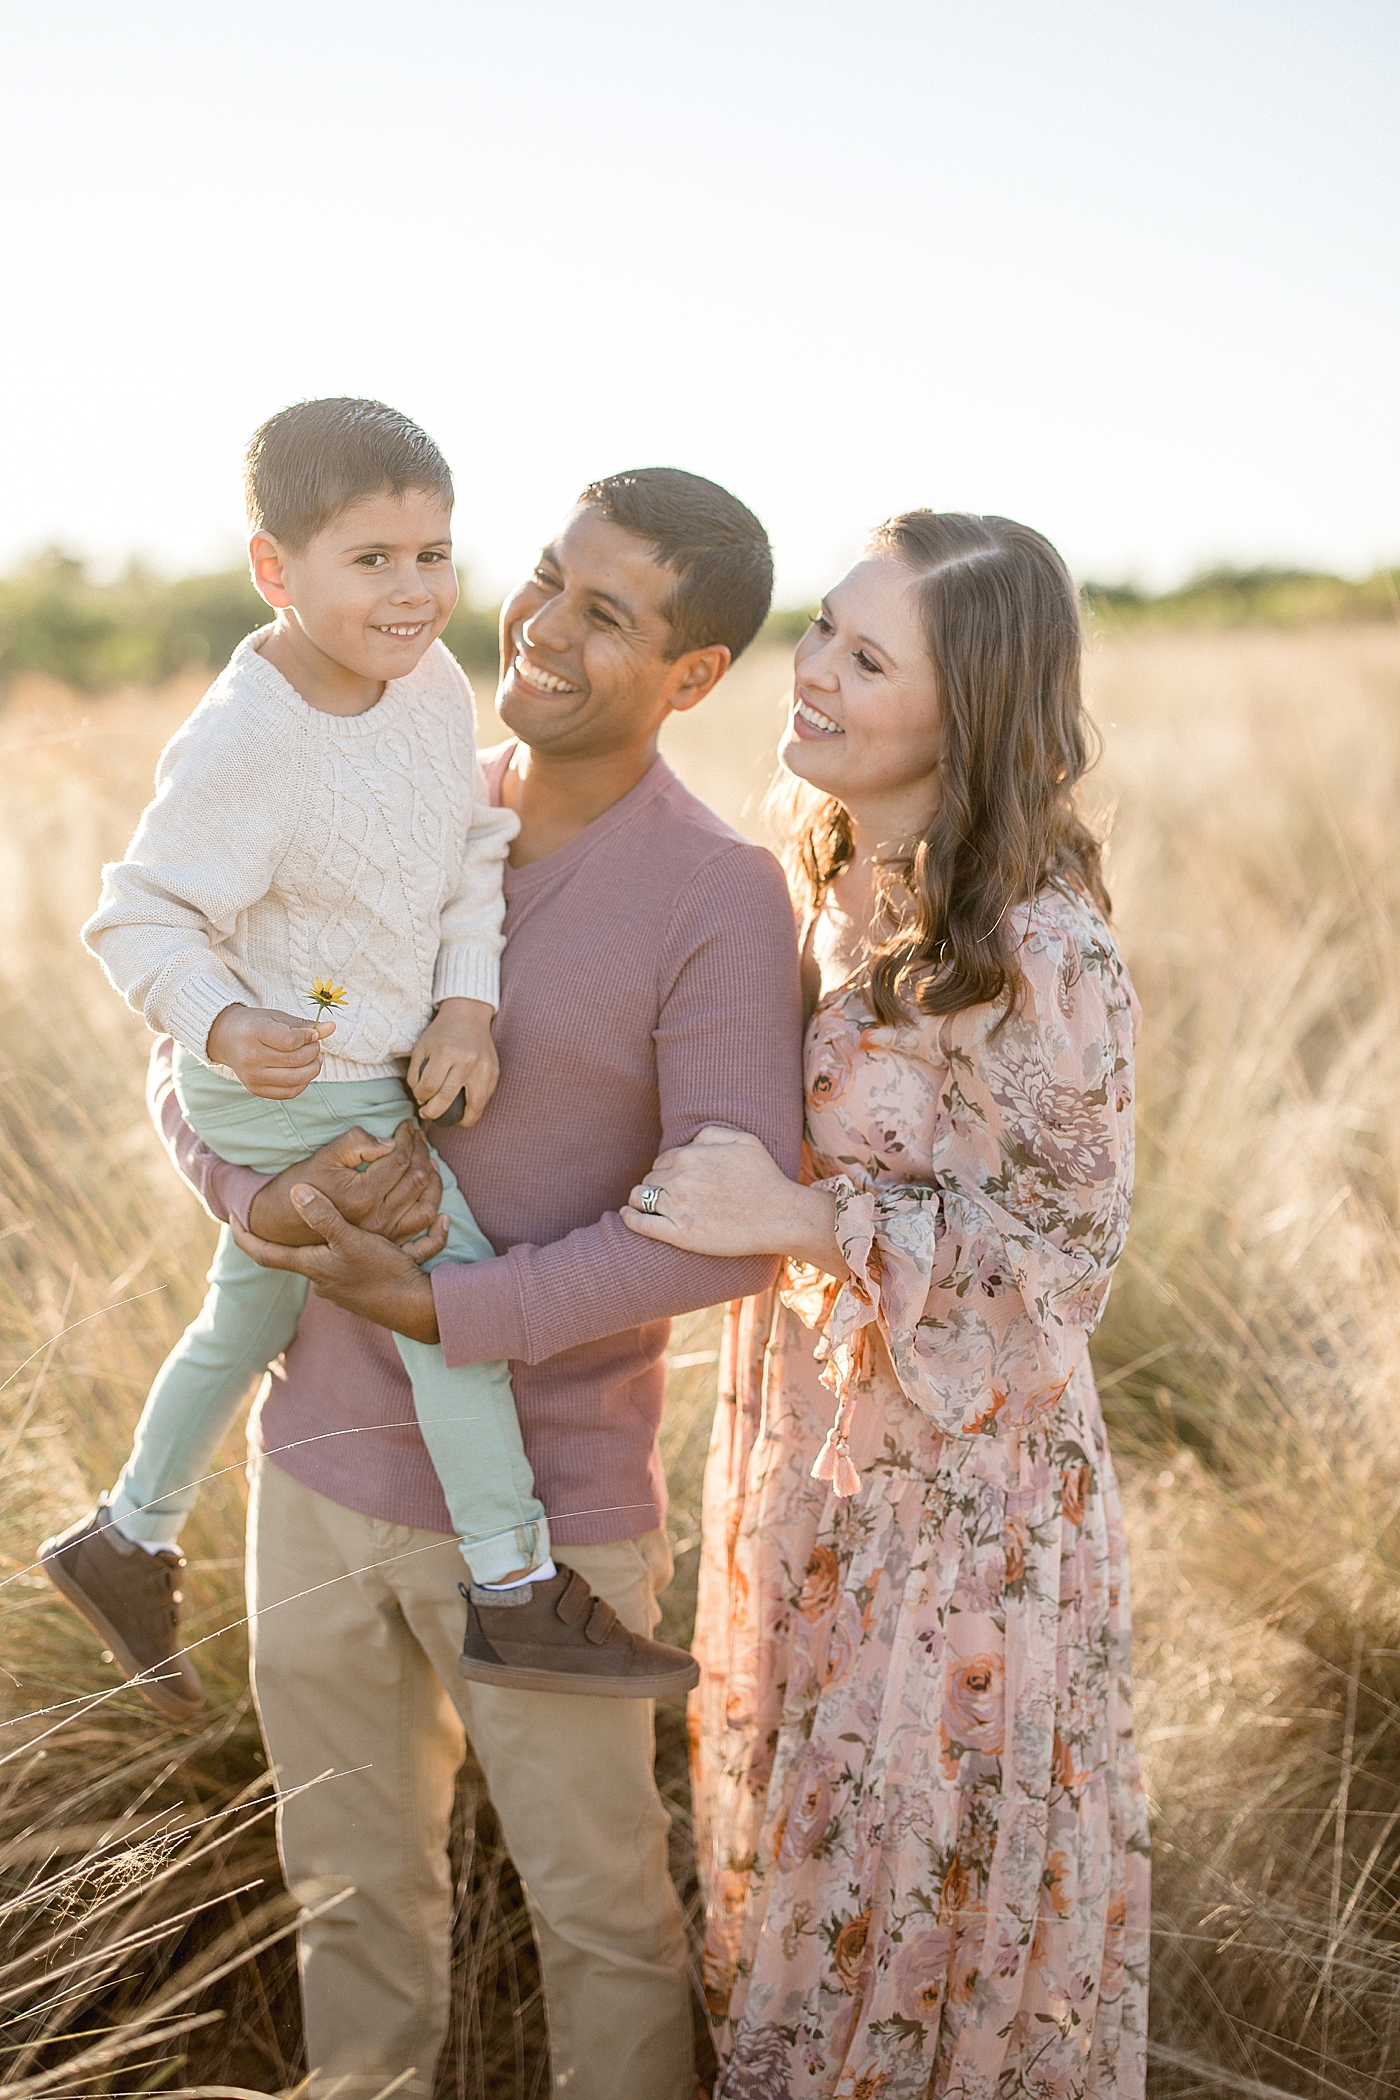 Annual family portraits at Cypress Point Park in Tampa, FL. Photos by Brittany Elise Photography.